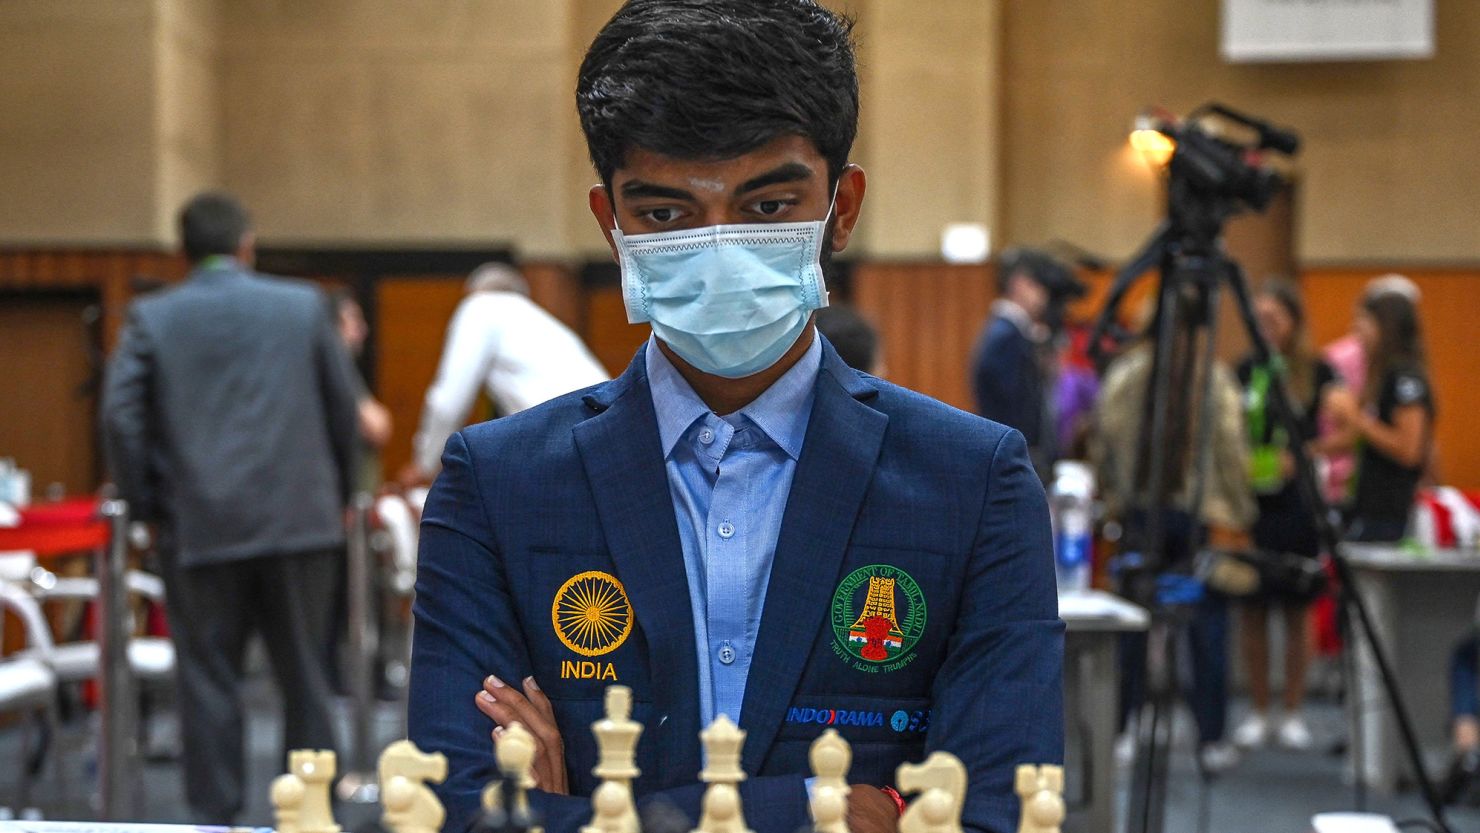 Gukesh surveys the board during his round nine game against the Azerbaijan team at the 44th Chess Olympiad on August 7, 2022.